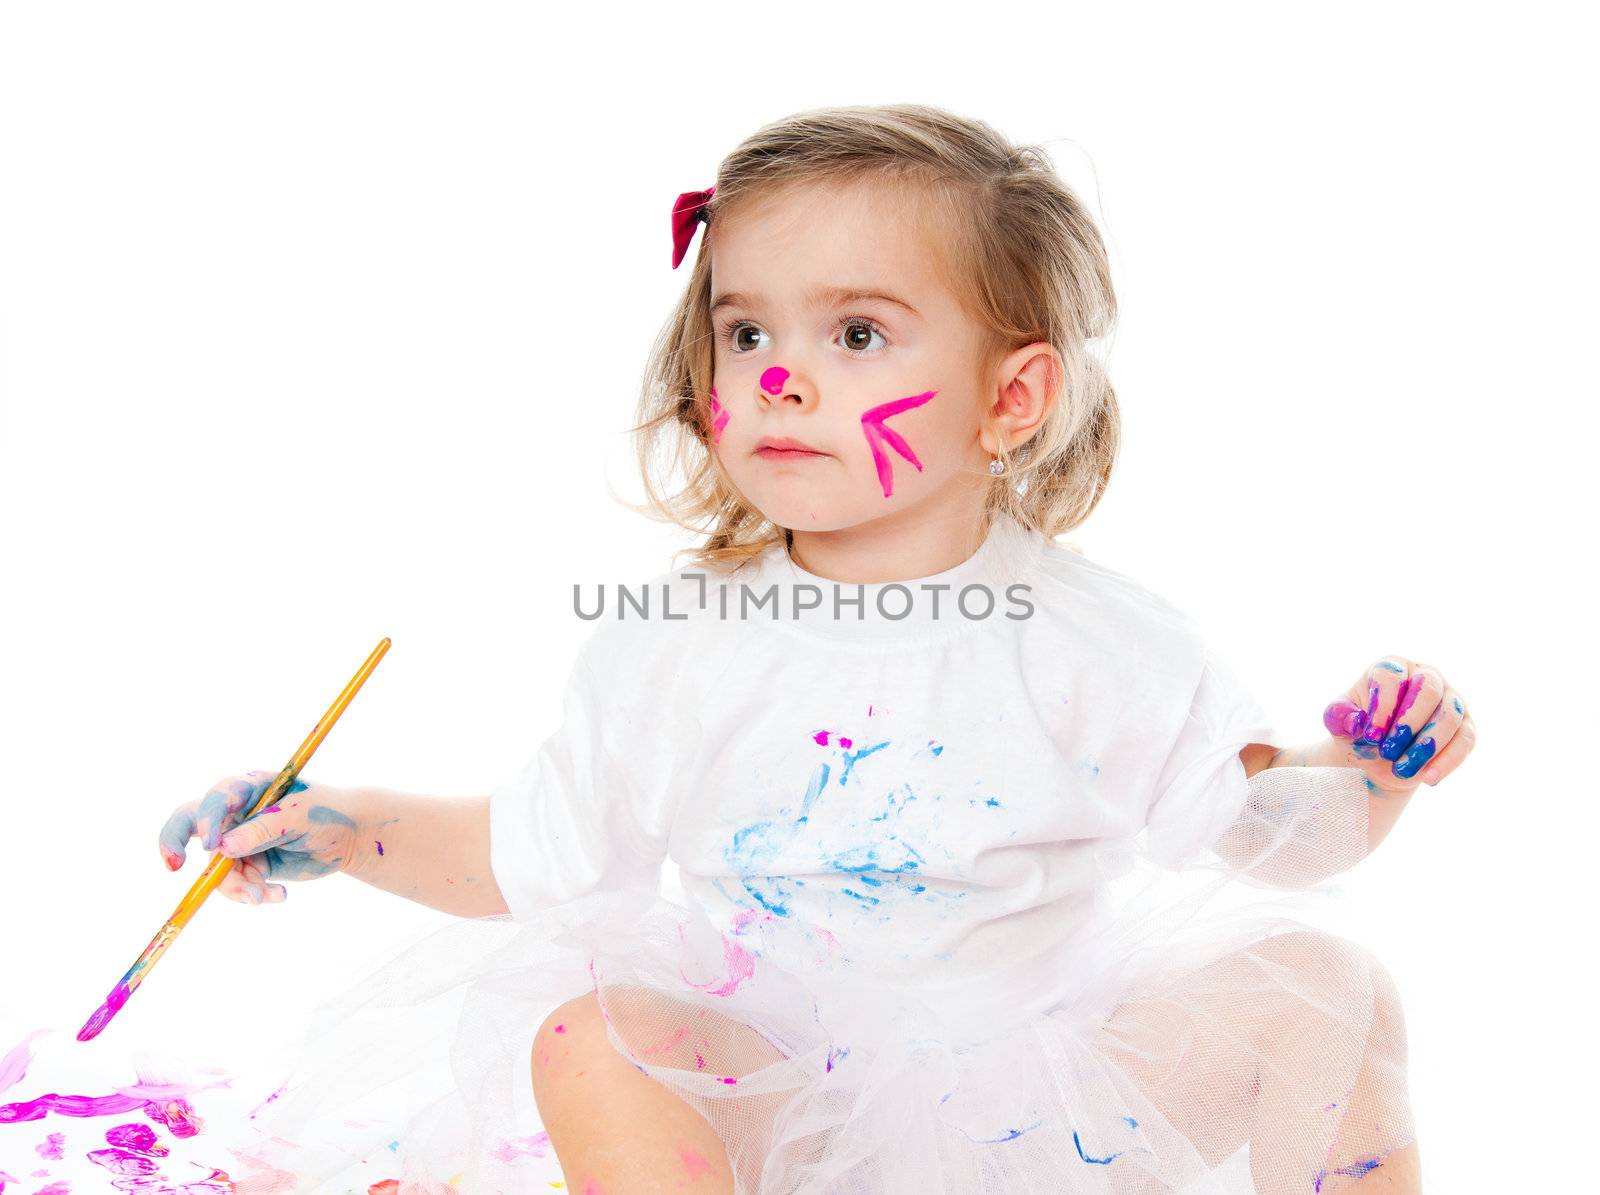 Beautiful little girl with a brush and paints